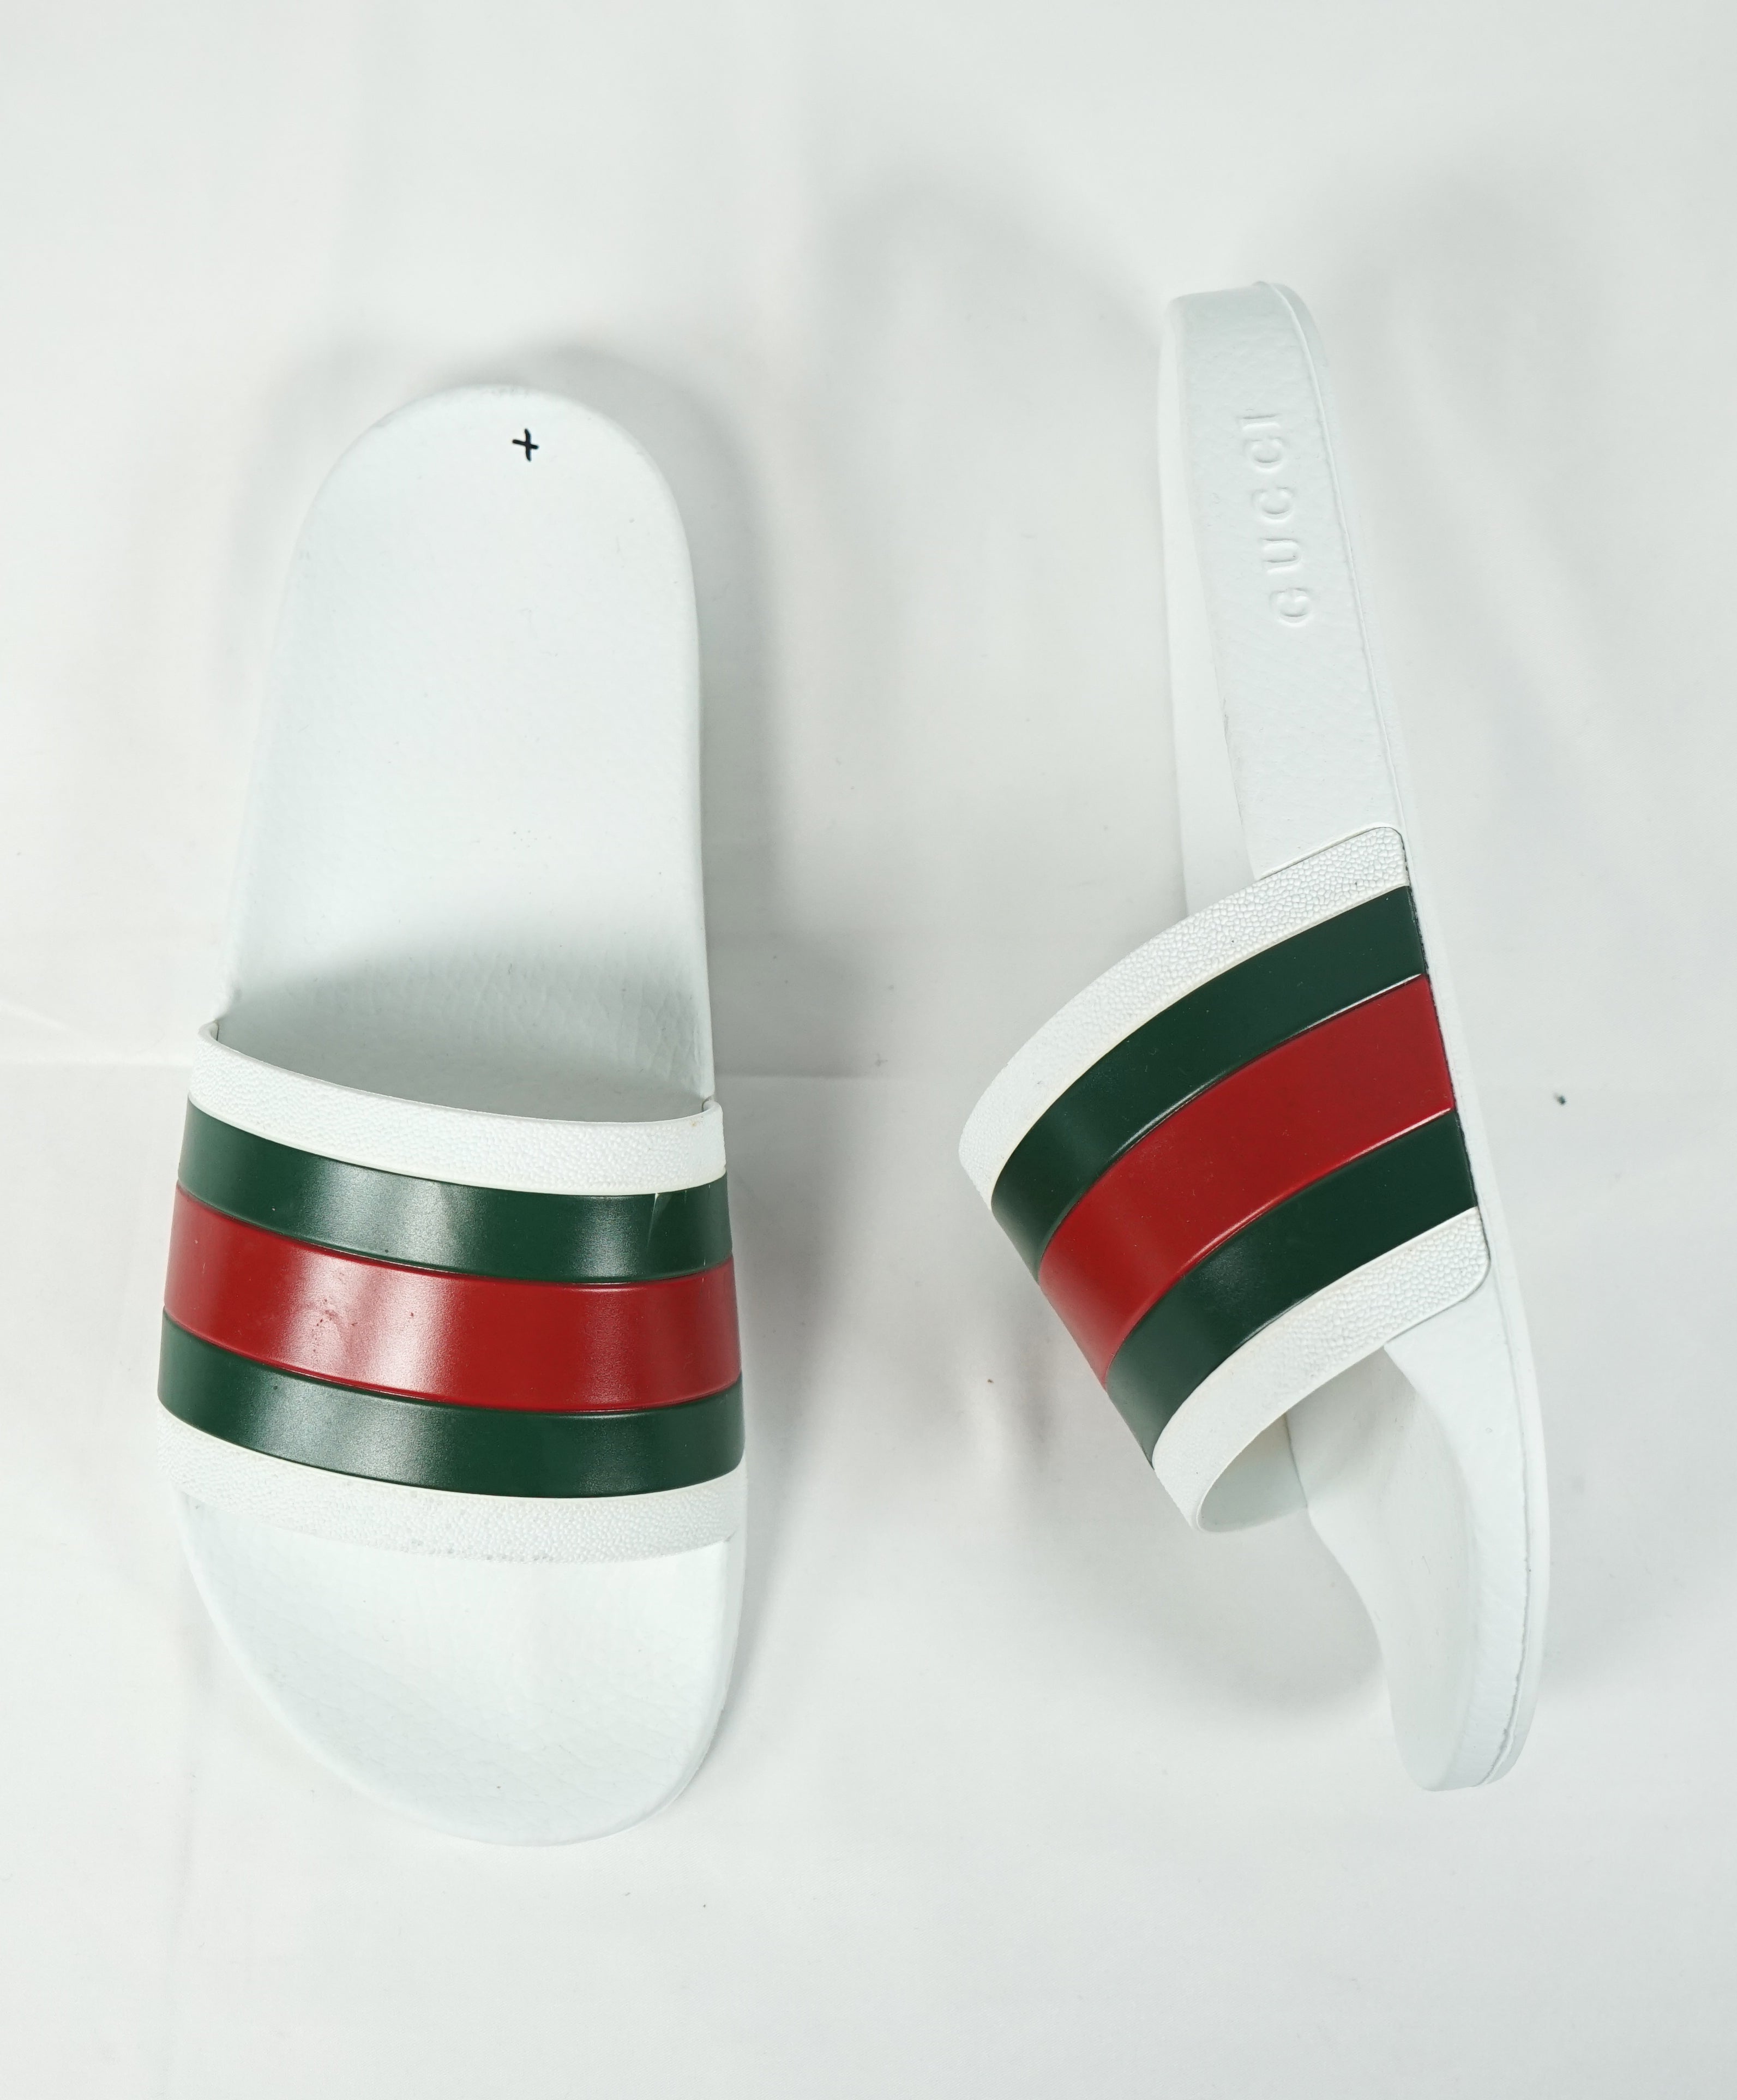 green and red gucci slides